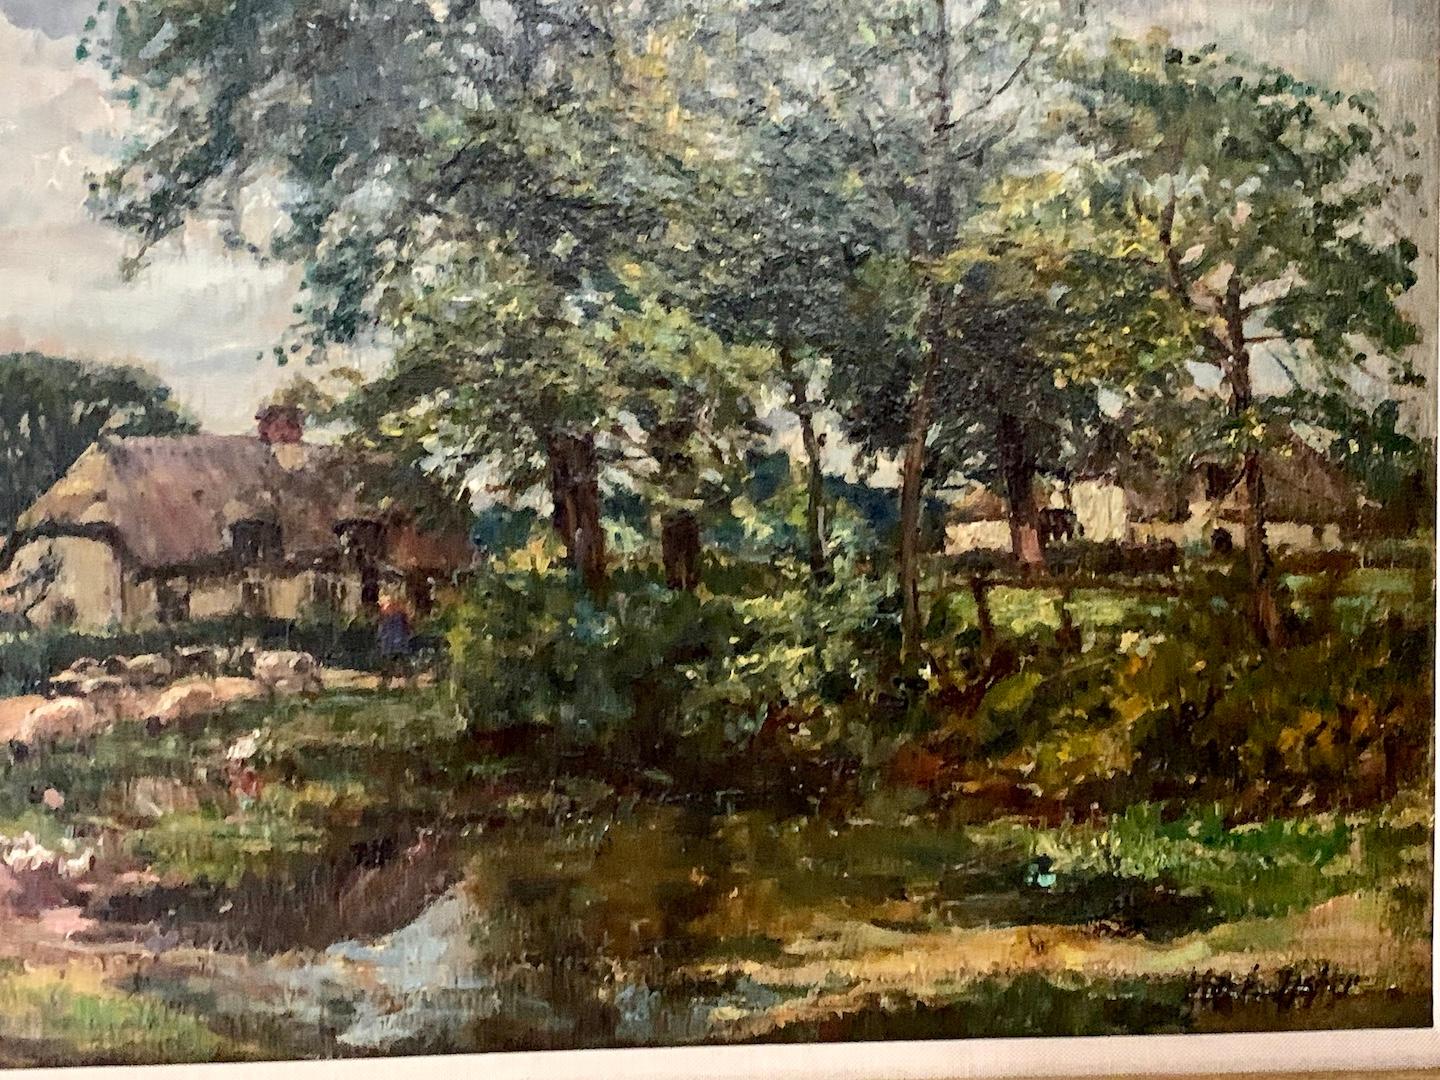 !9th century Impressionist landscape with a horse and cart in a Village - Brown Figurative Painting by William Mark Fisher